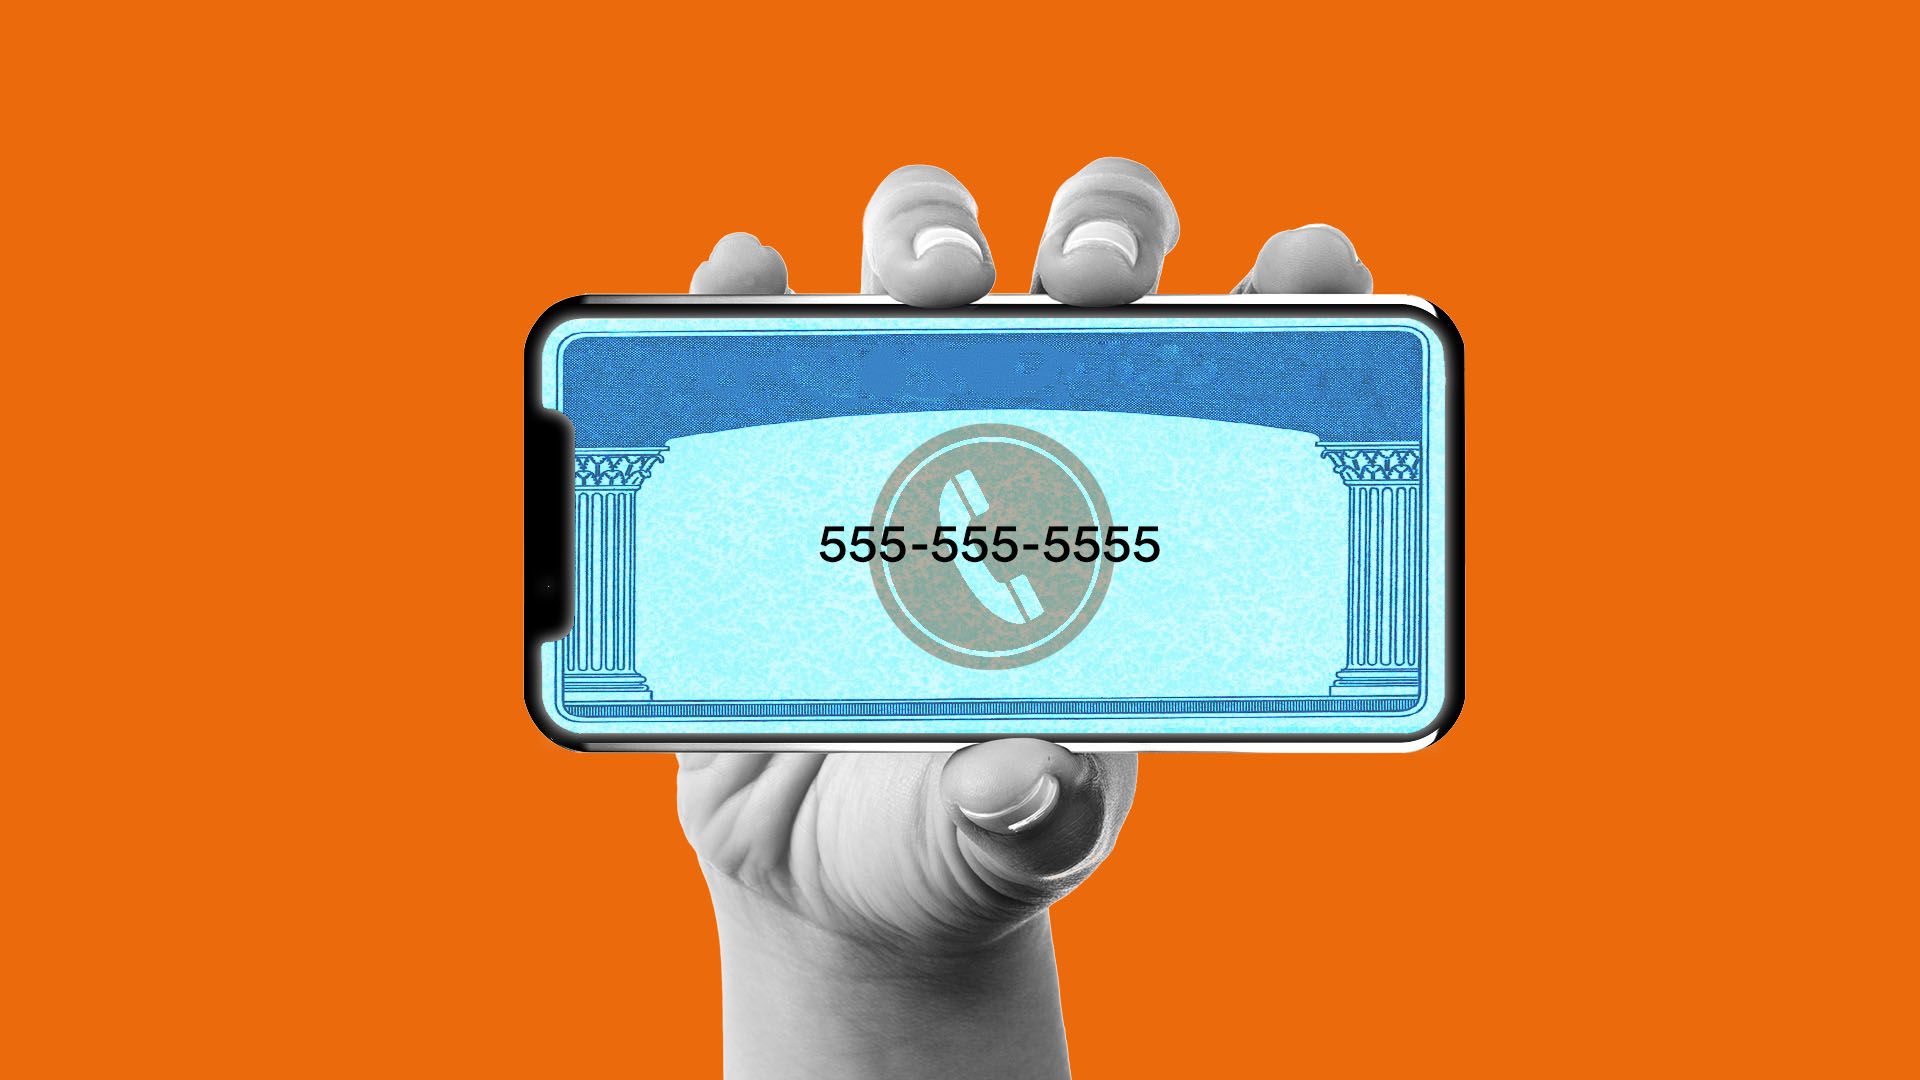 Phone numbers are the new Social Security numbers - Axios